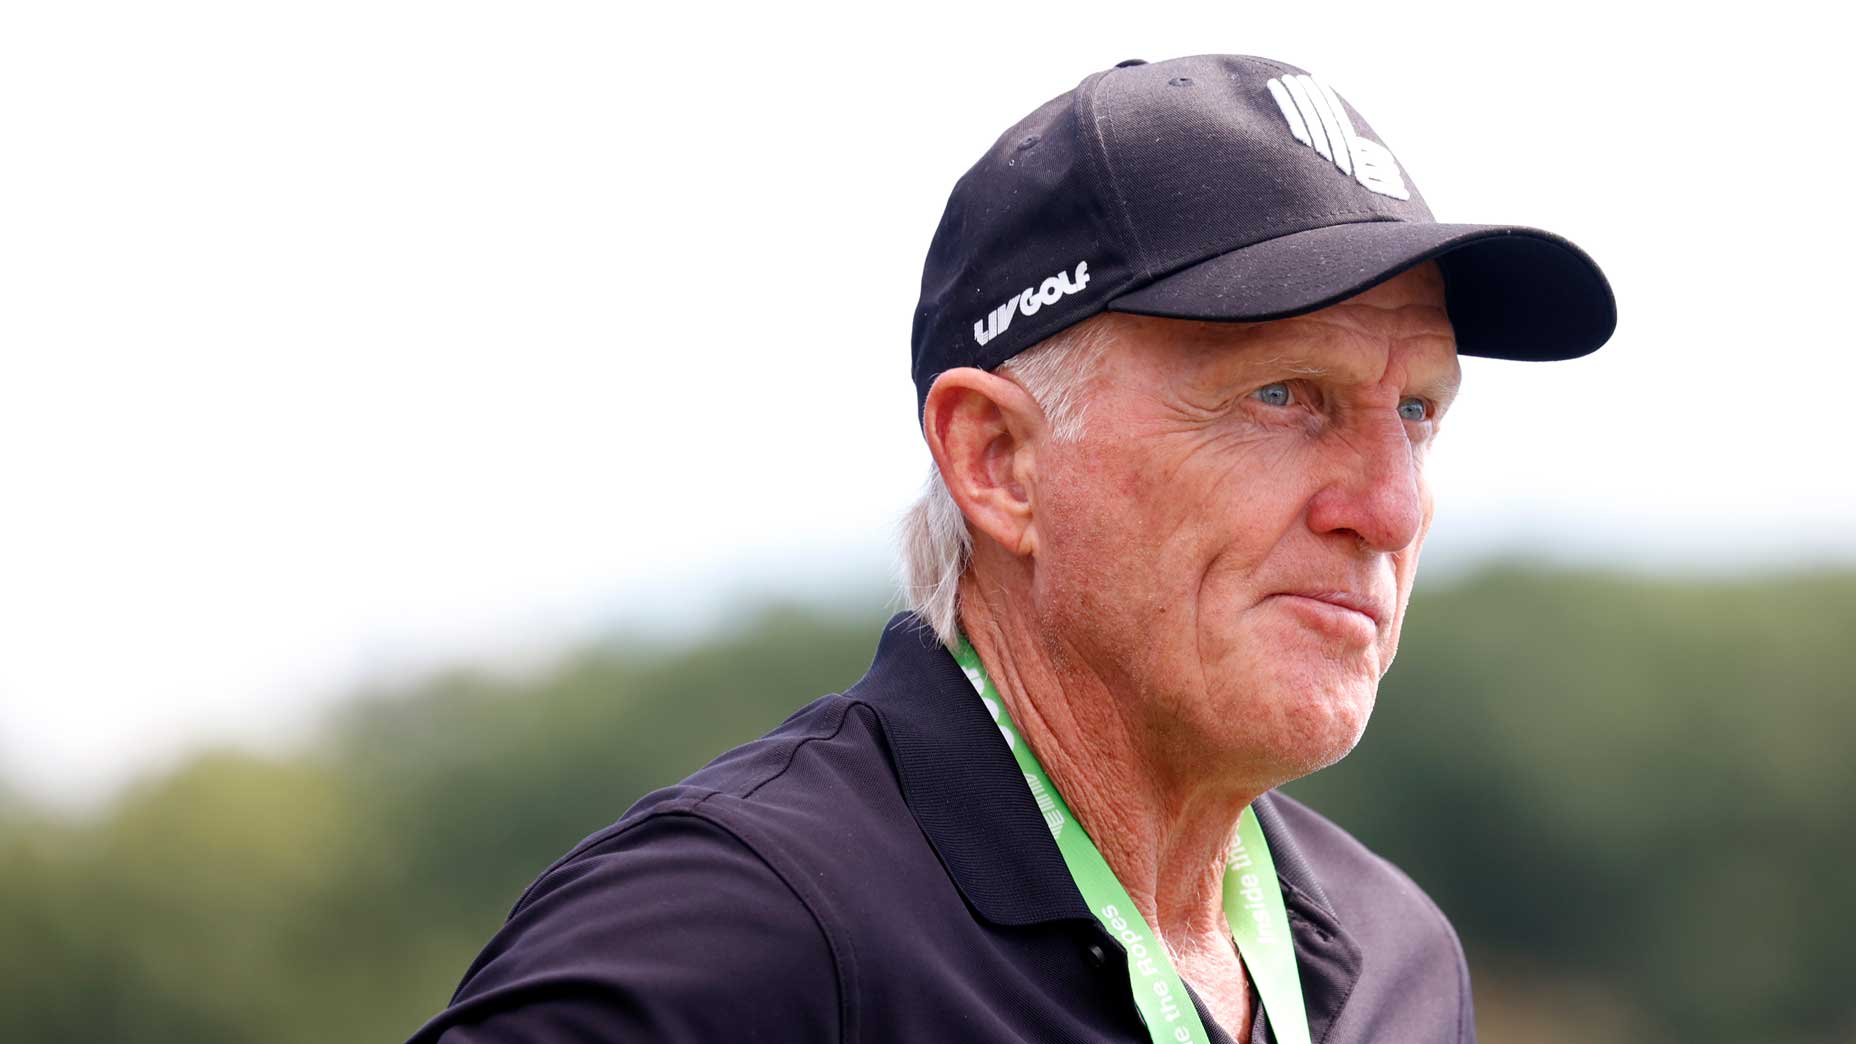 Greg Norman opens up on Rory McIlroy, resolution and his ‘moral line’